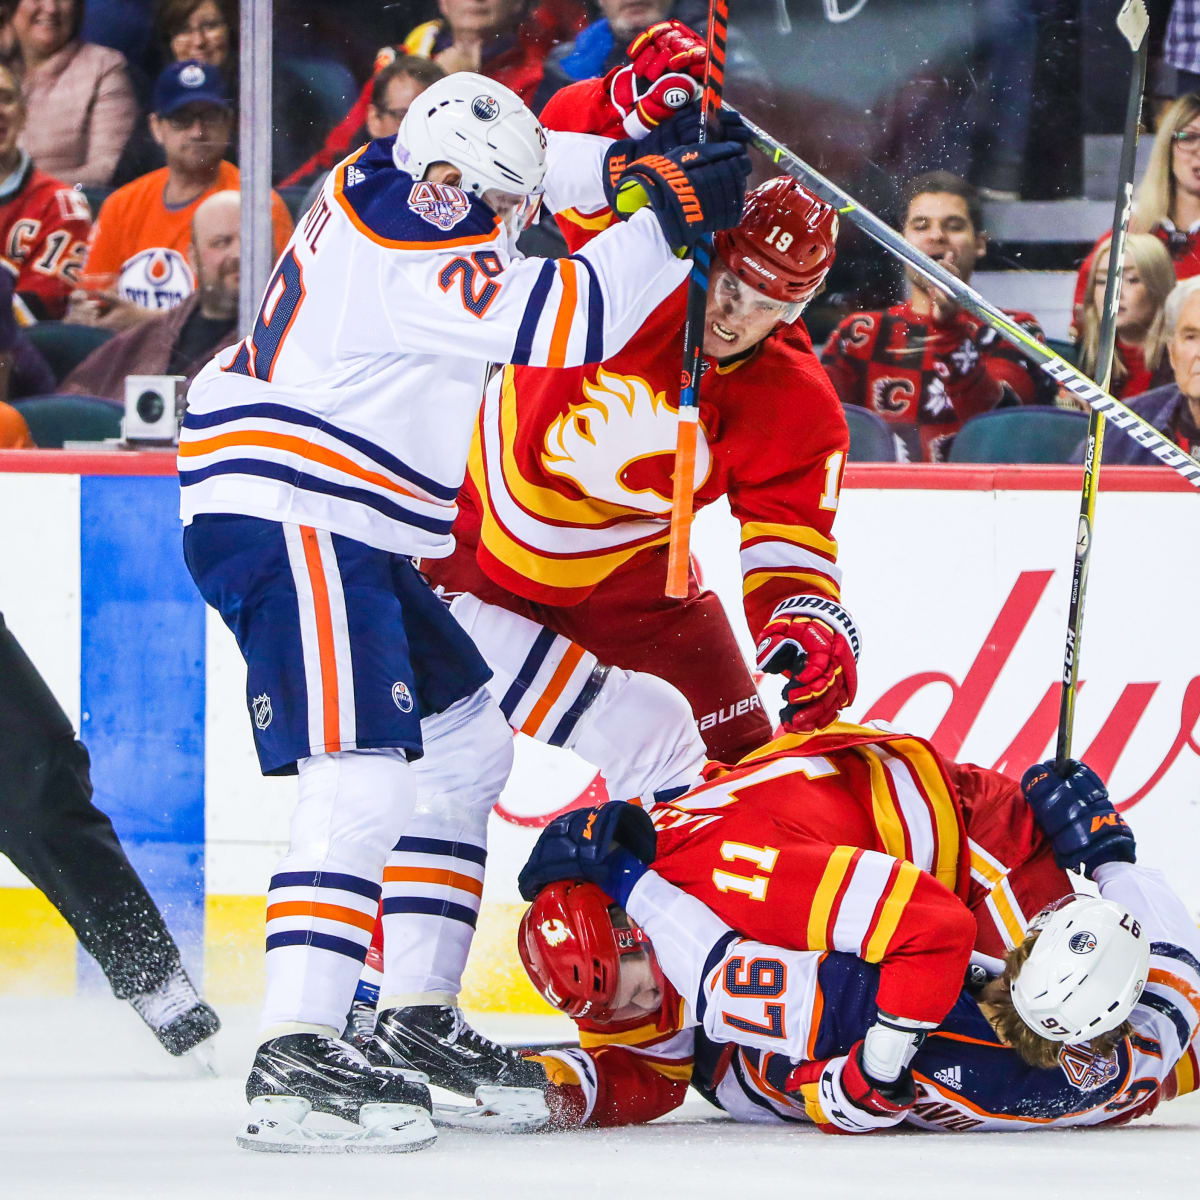 Oilers and Flames in Battle of Alberta: Bedlam on the Ice, Torn Loyalties  Off It - The New York Times